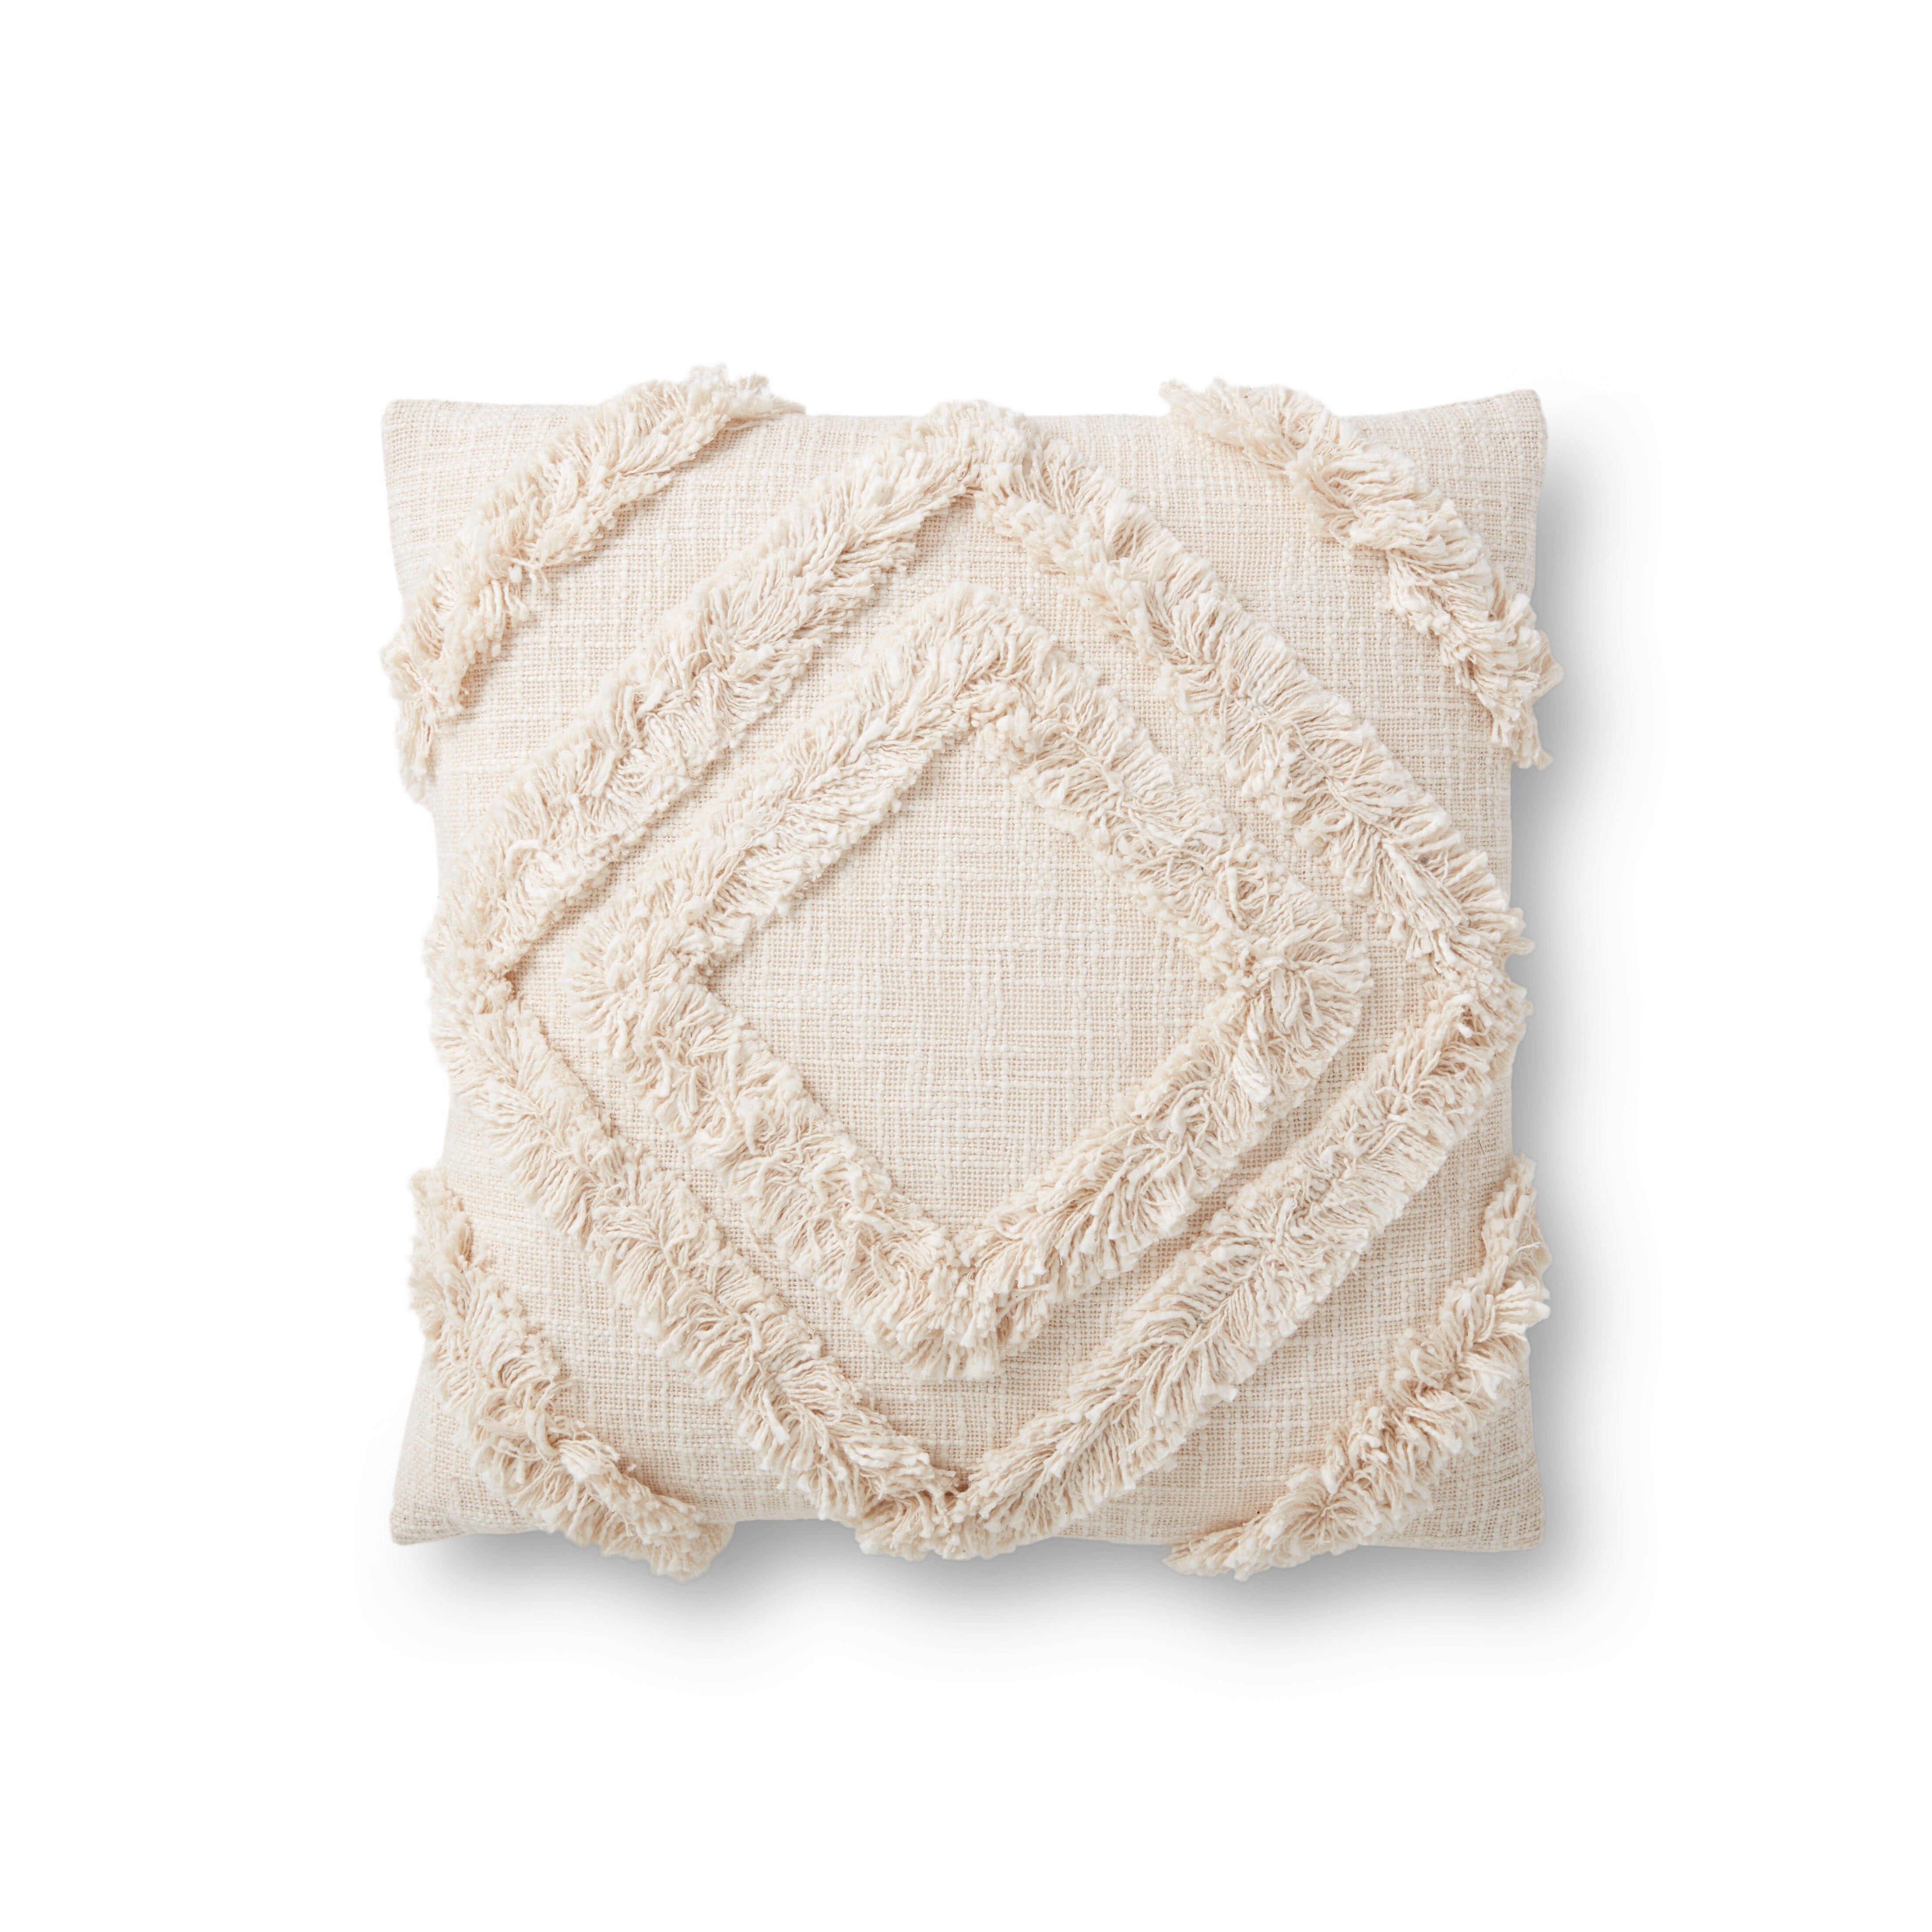 Magnolia Home by Joanna Gaines x Loloi Pillow | Cream PILLOW Magnolia Home by Joanna Gaines x Loloi